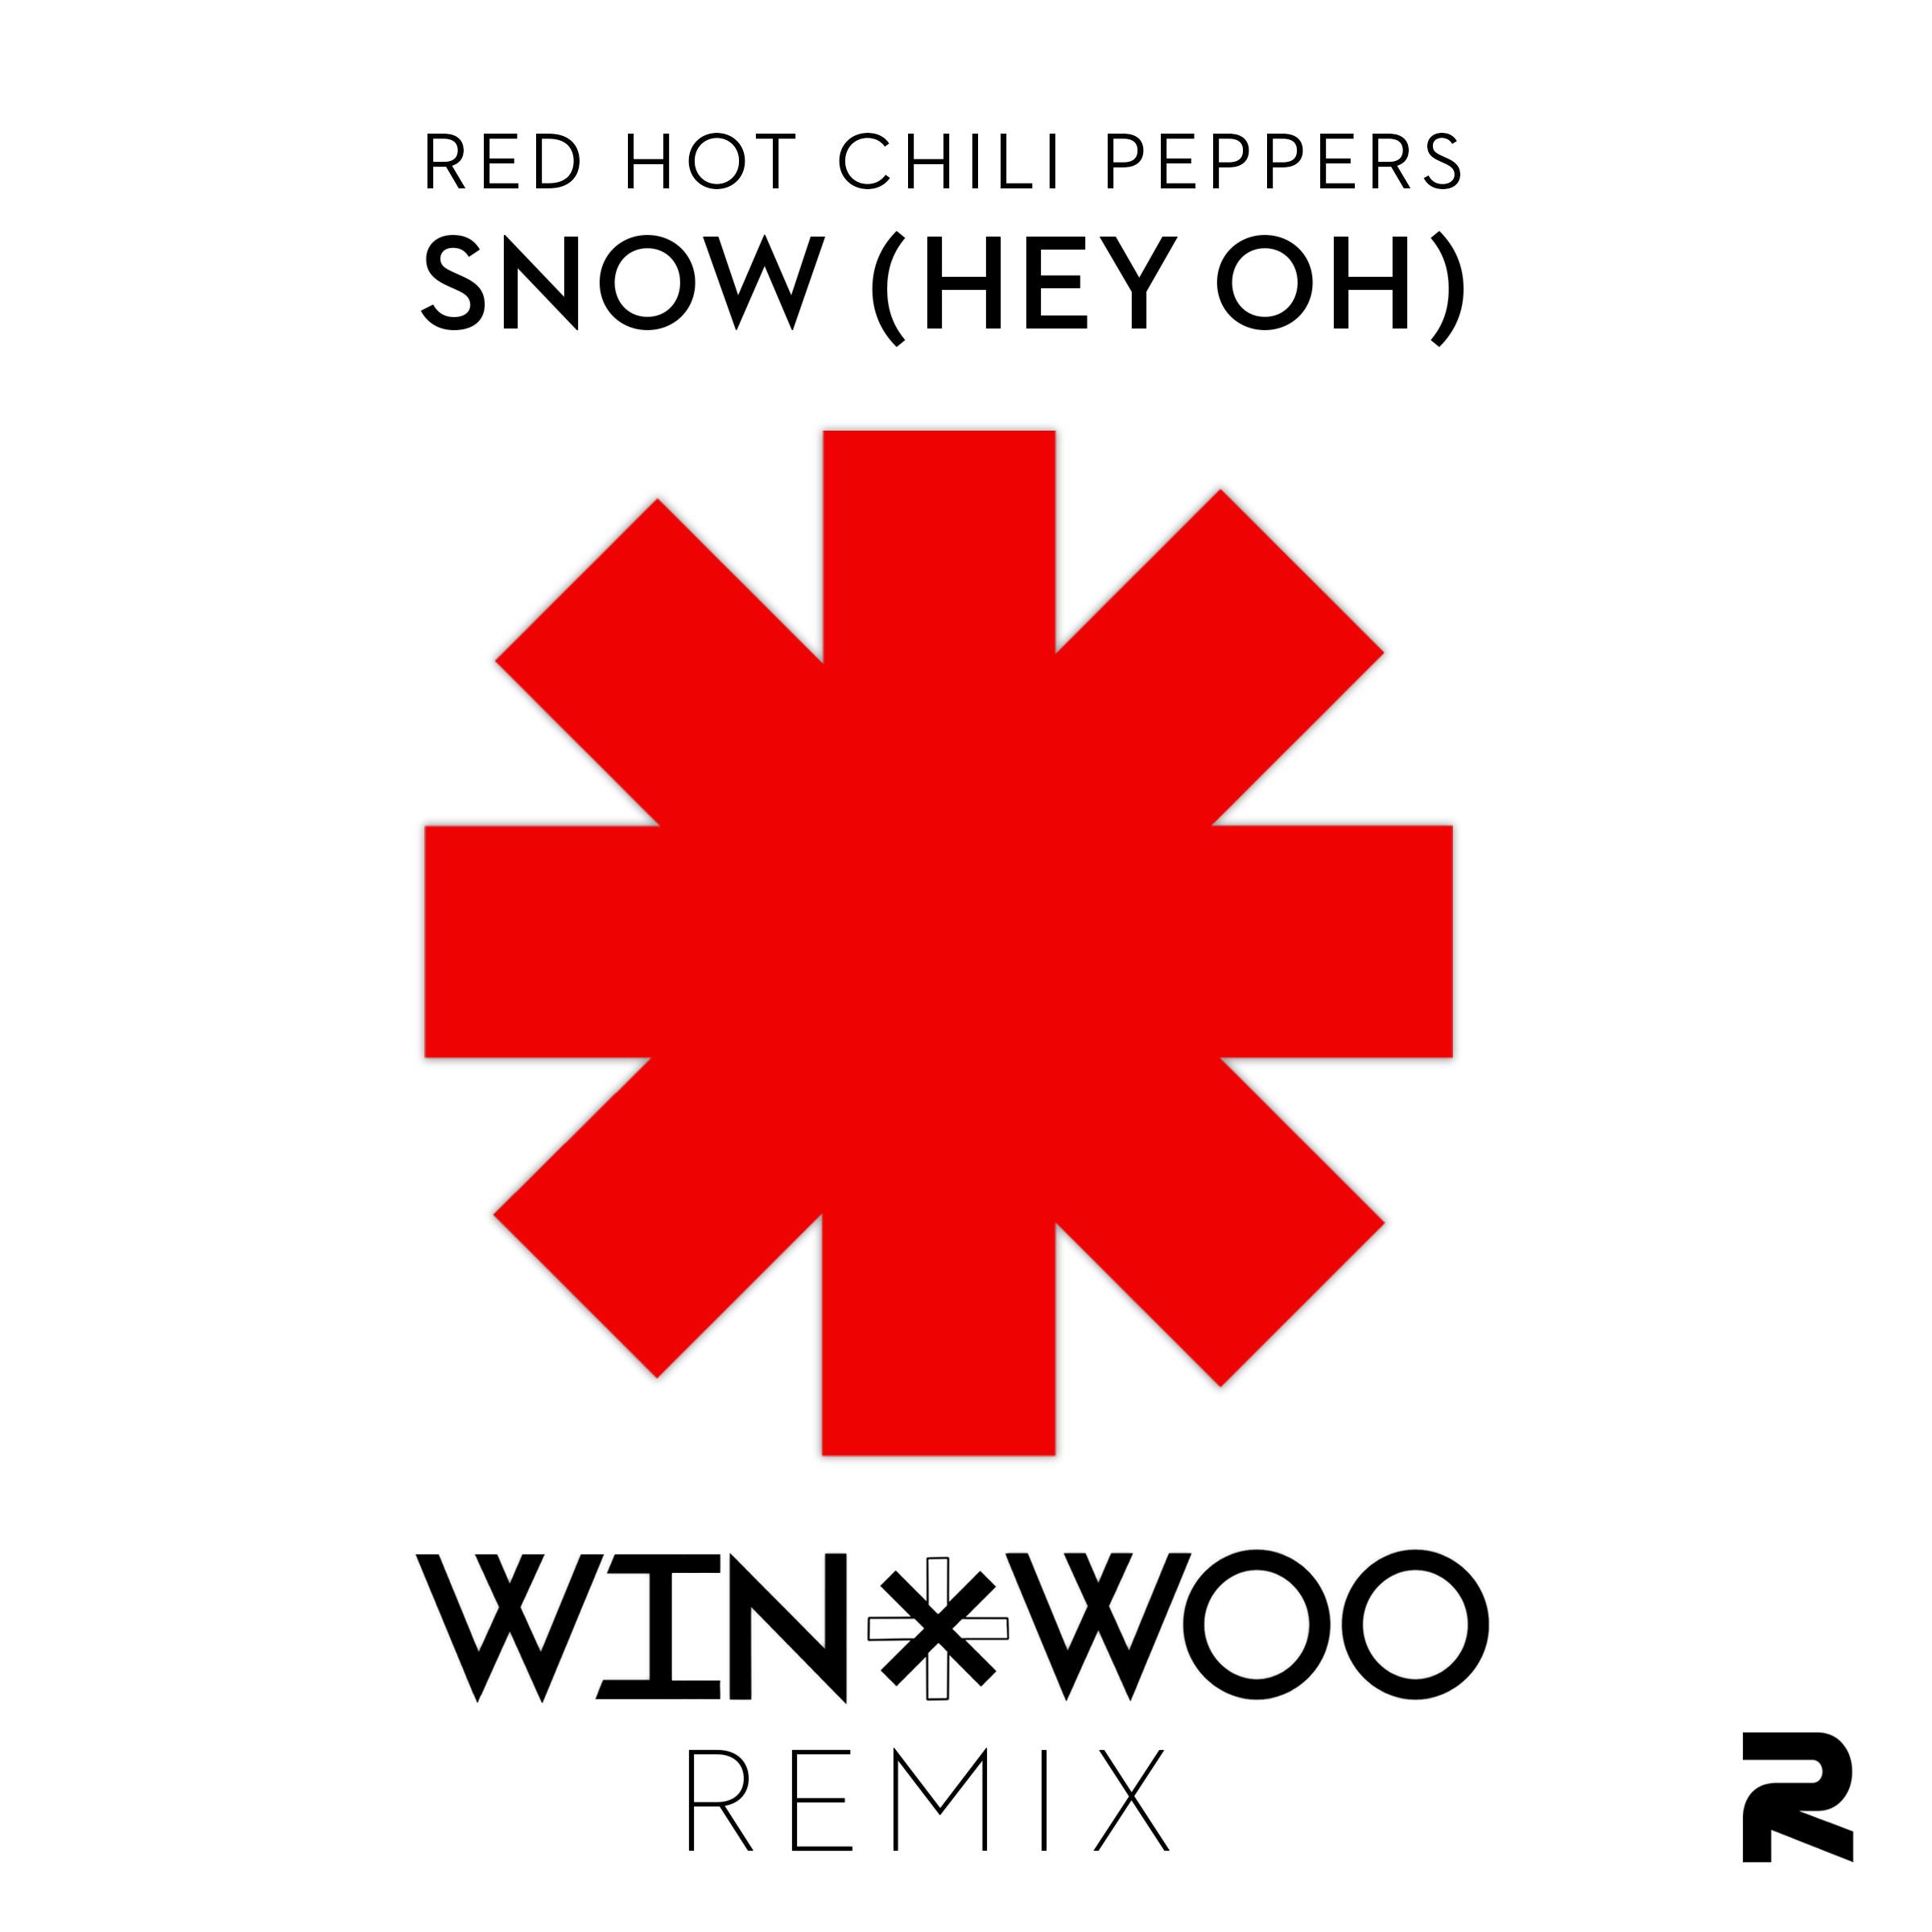 Chili peppers mp3. RHCP Snow. Red hot Chili Peppers. Сноу ред хот Чили Пепперс. Snow Hey Oh.